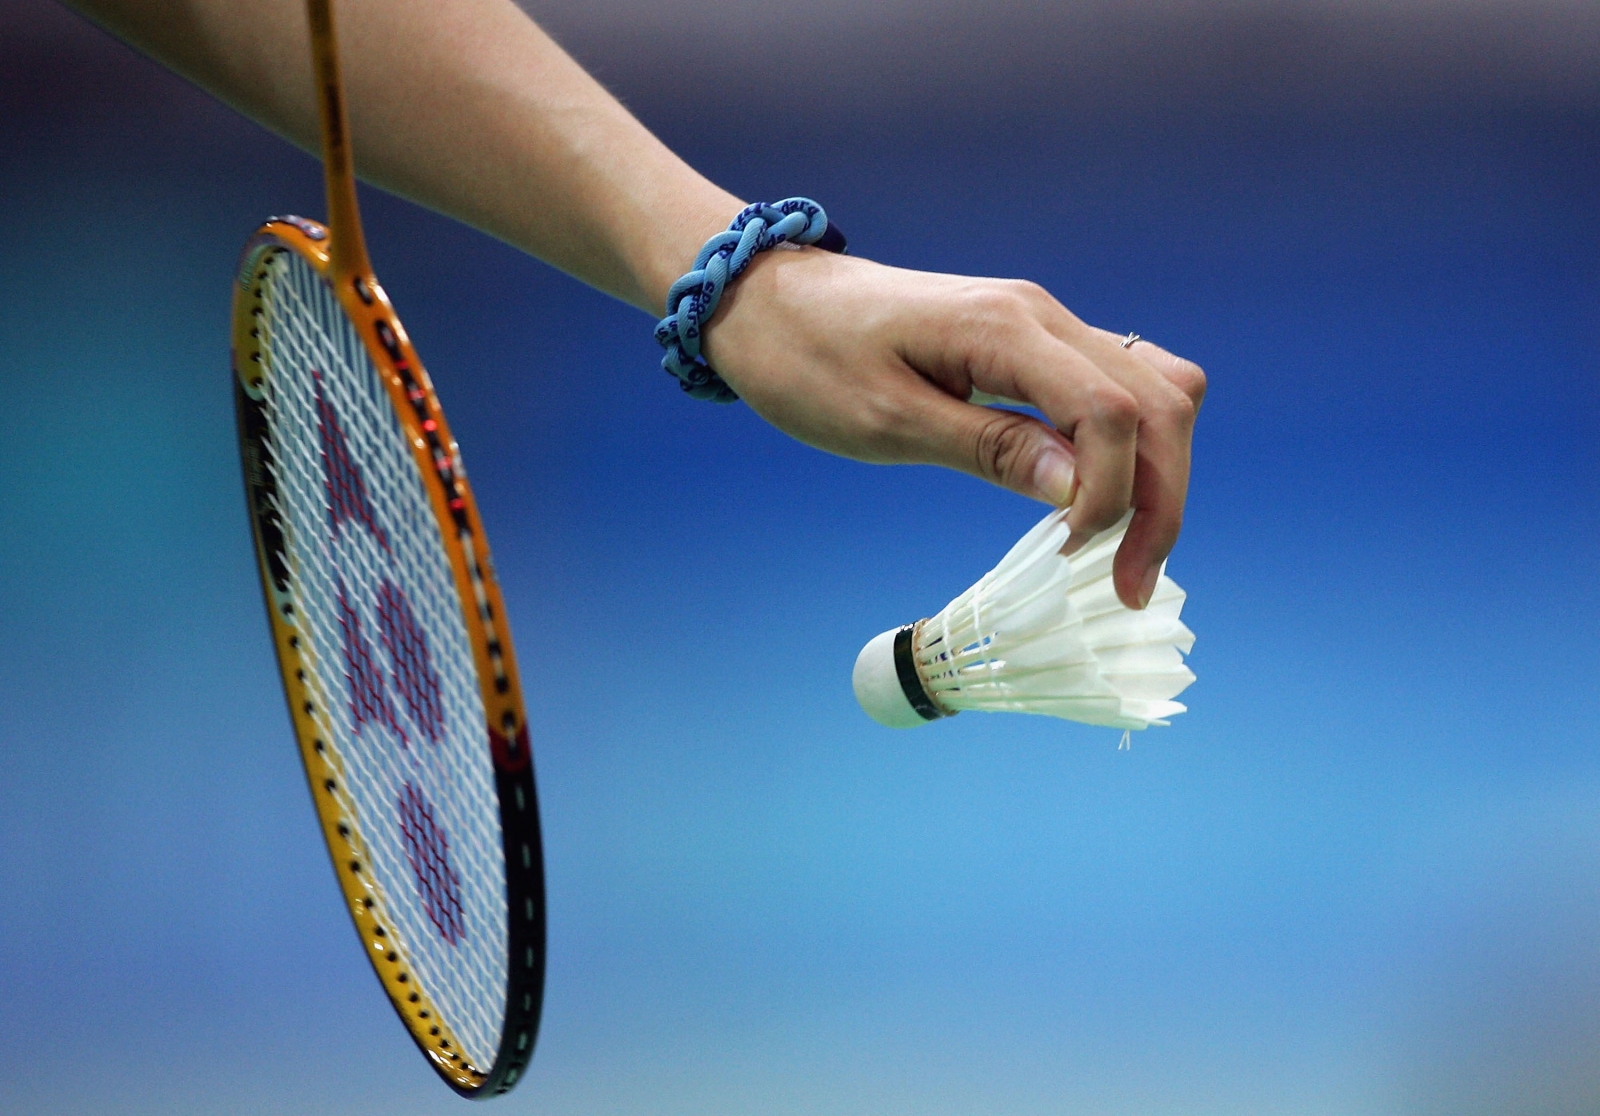 Rio 2016 Olympic Games Badminton Schedule, format, athlete to watch